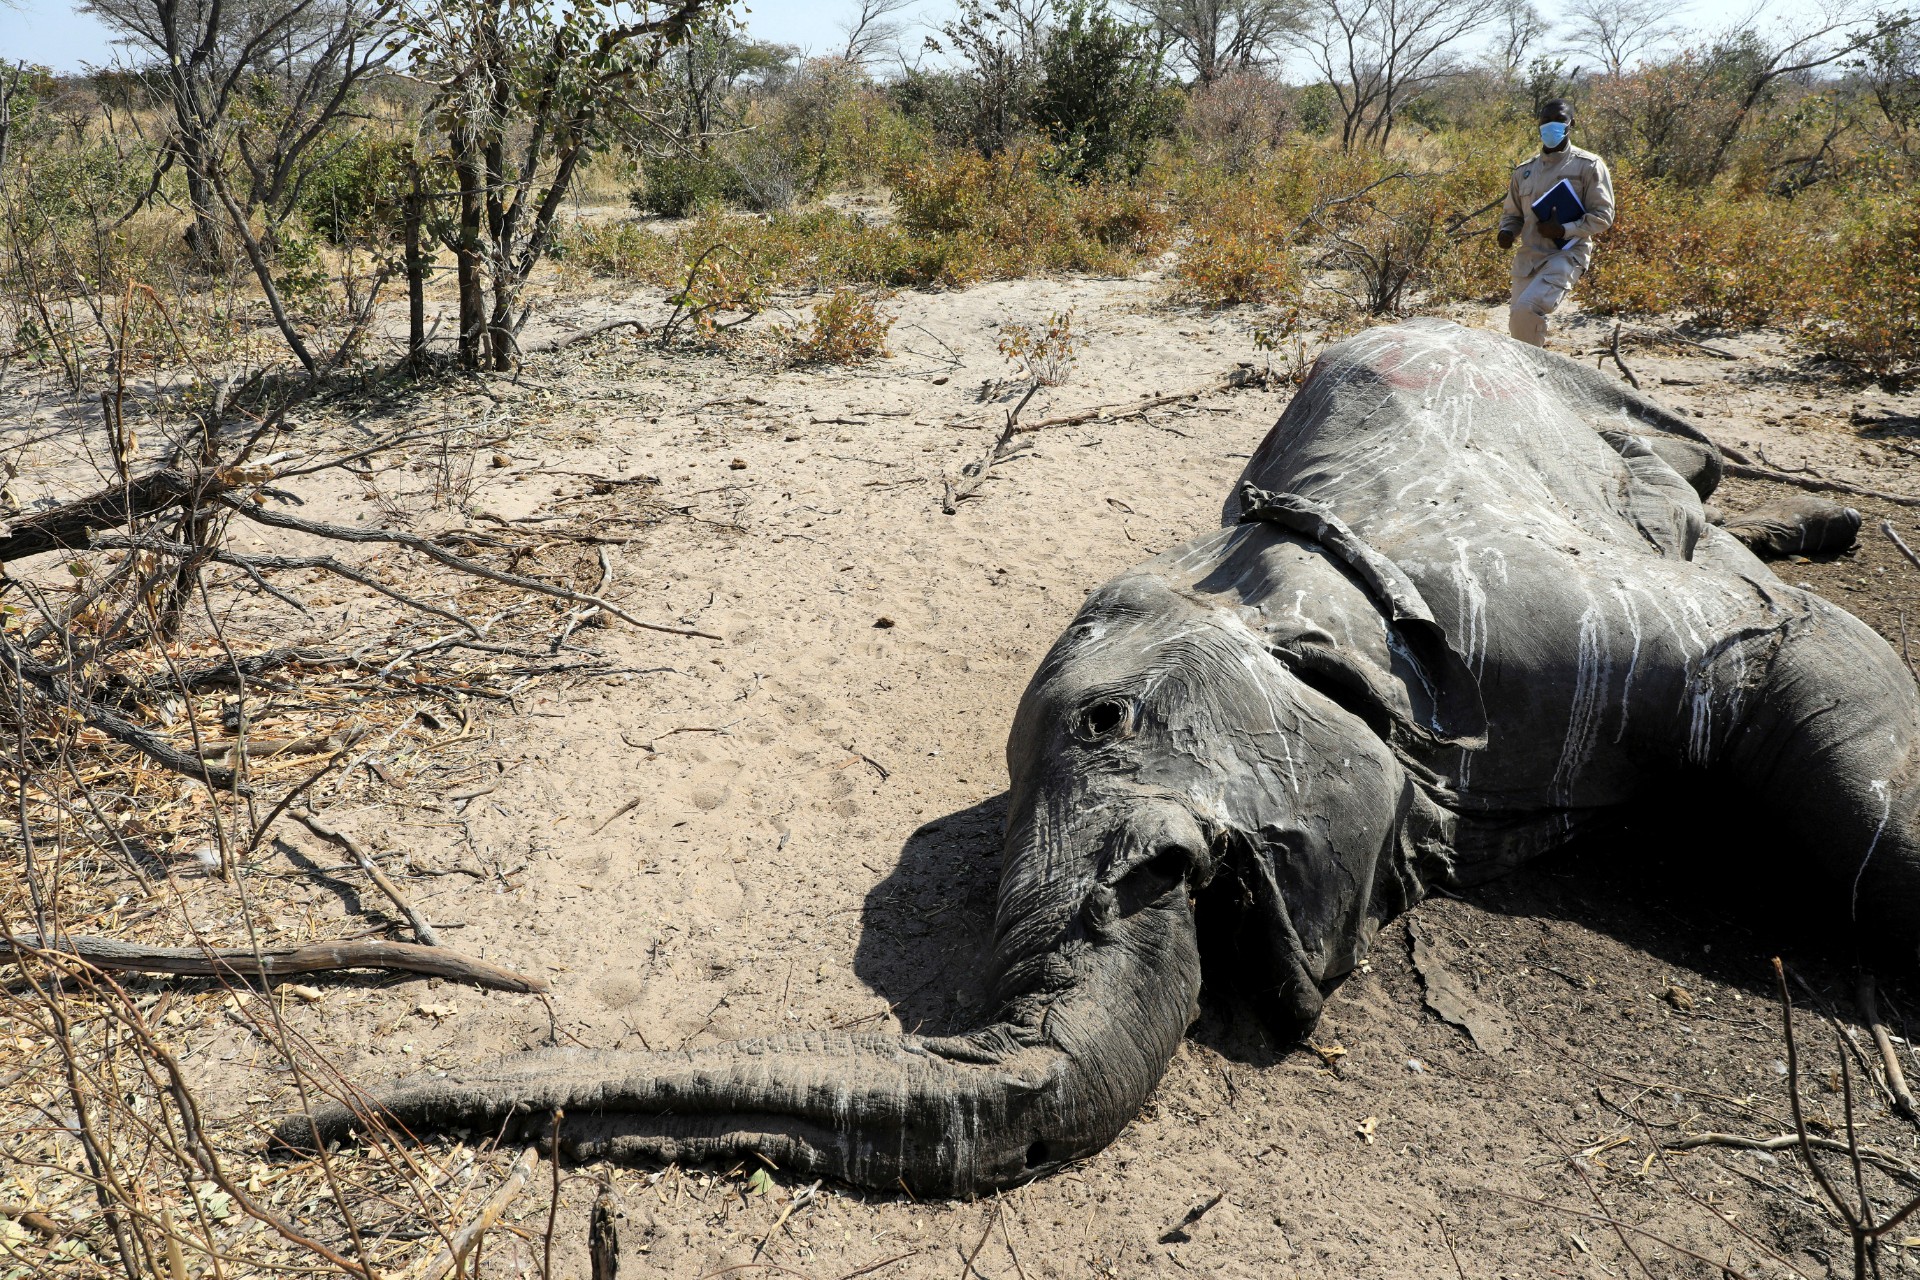 Botswana Gets First Test Results On Mysterious Elephant Deaths